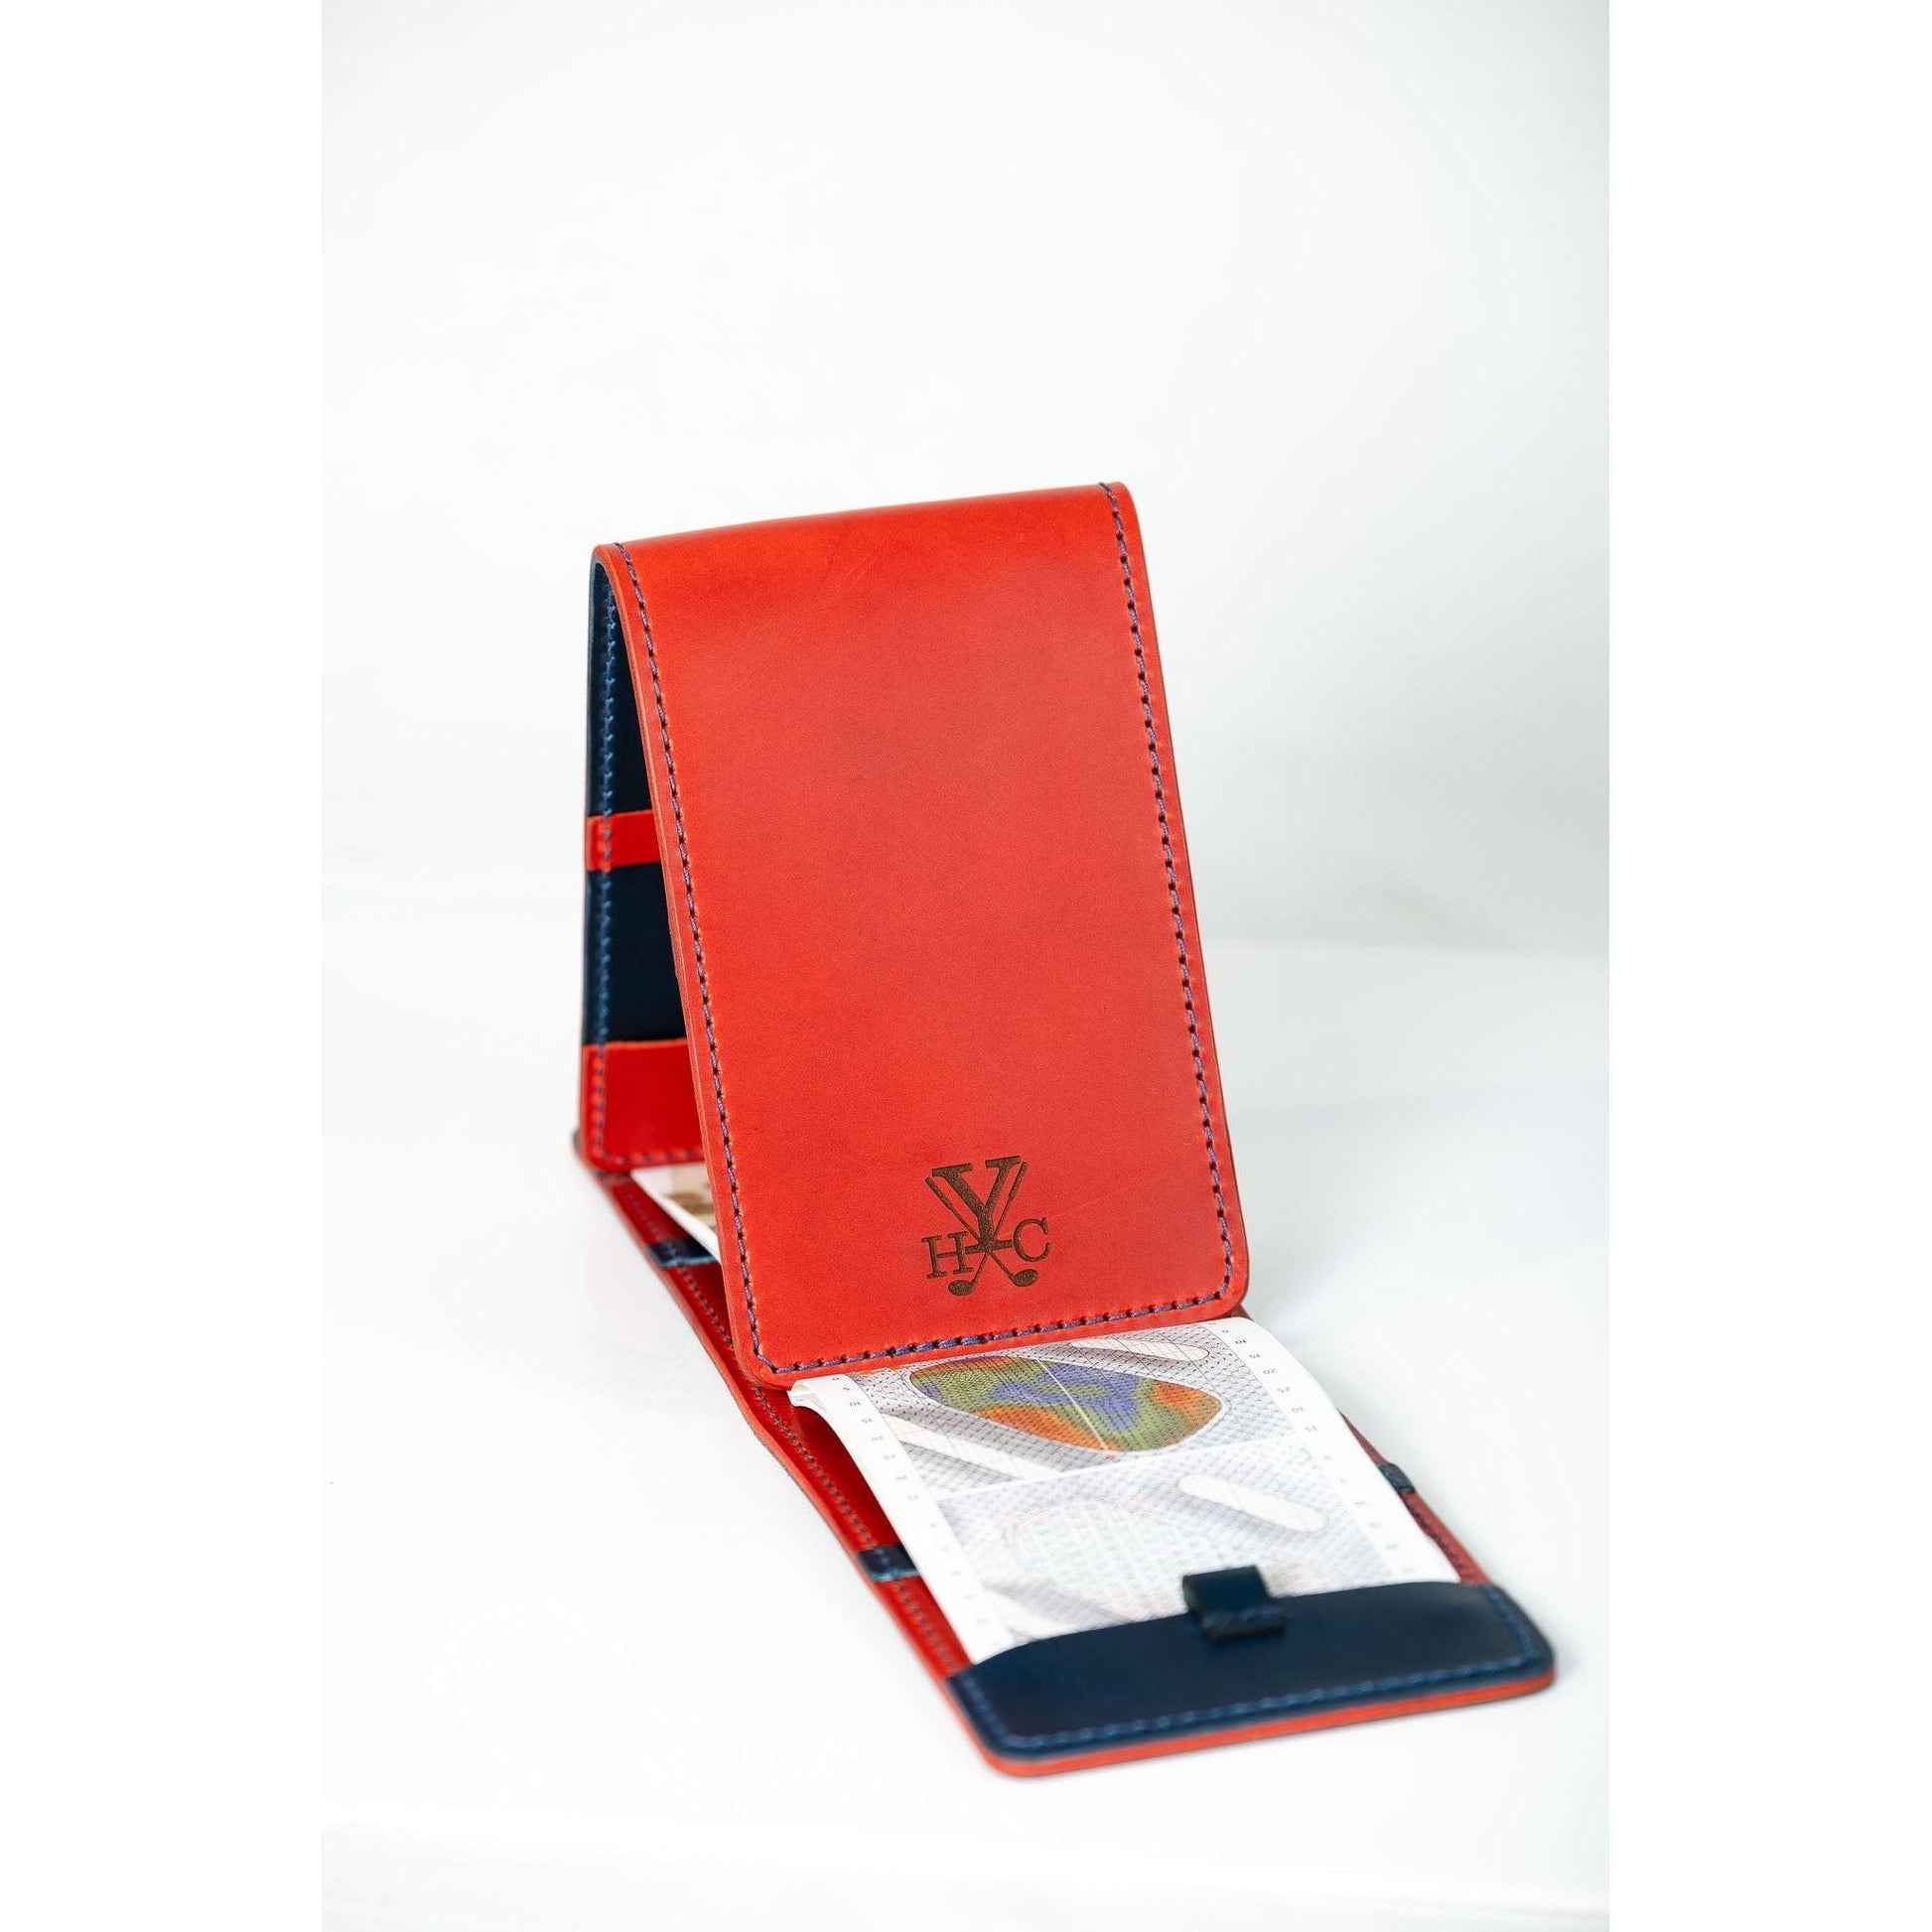 All Leather Luxury Yardage Book Cover - Bluetross Golf